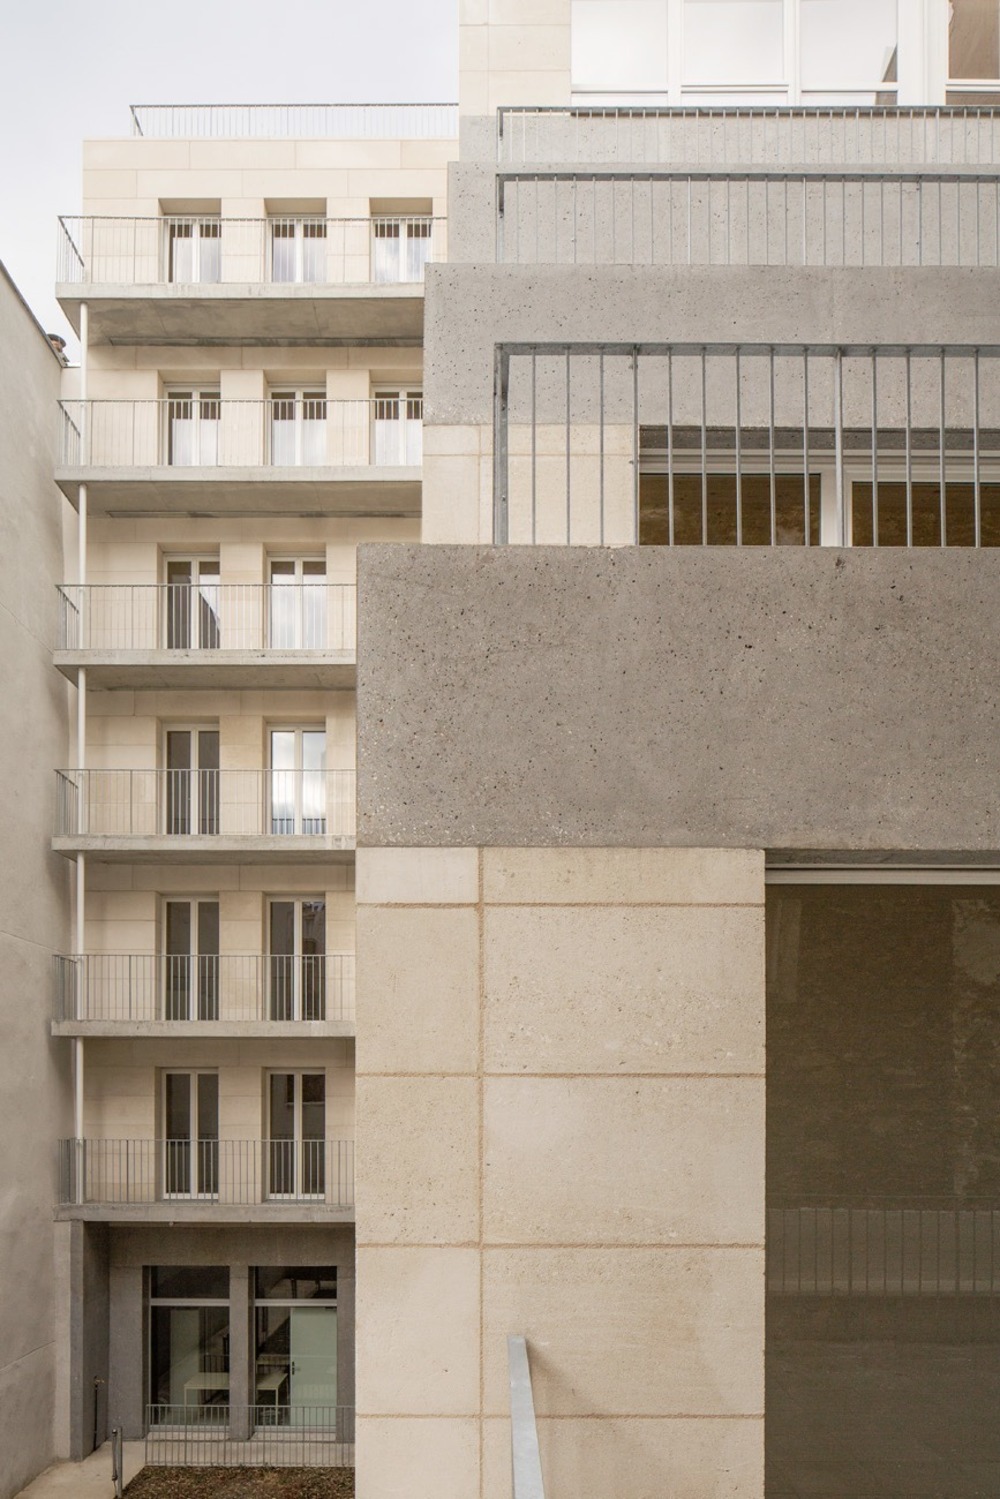 Stone social housing project by Barrault Pressacco